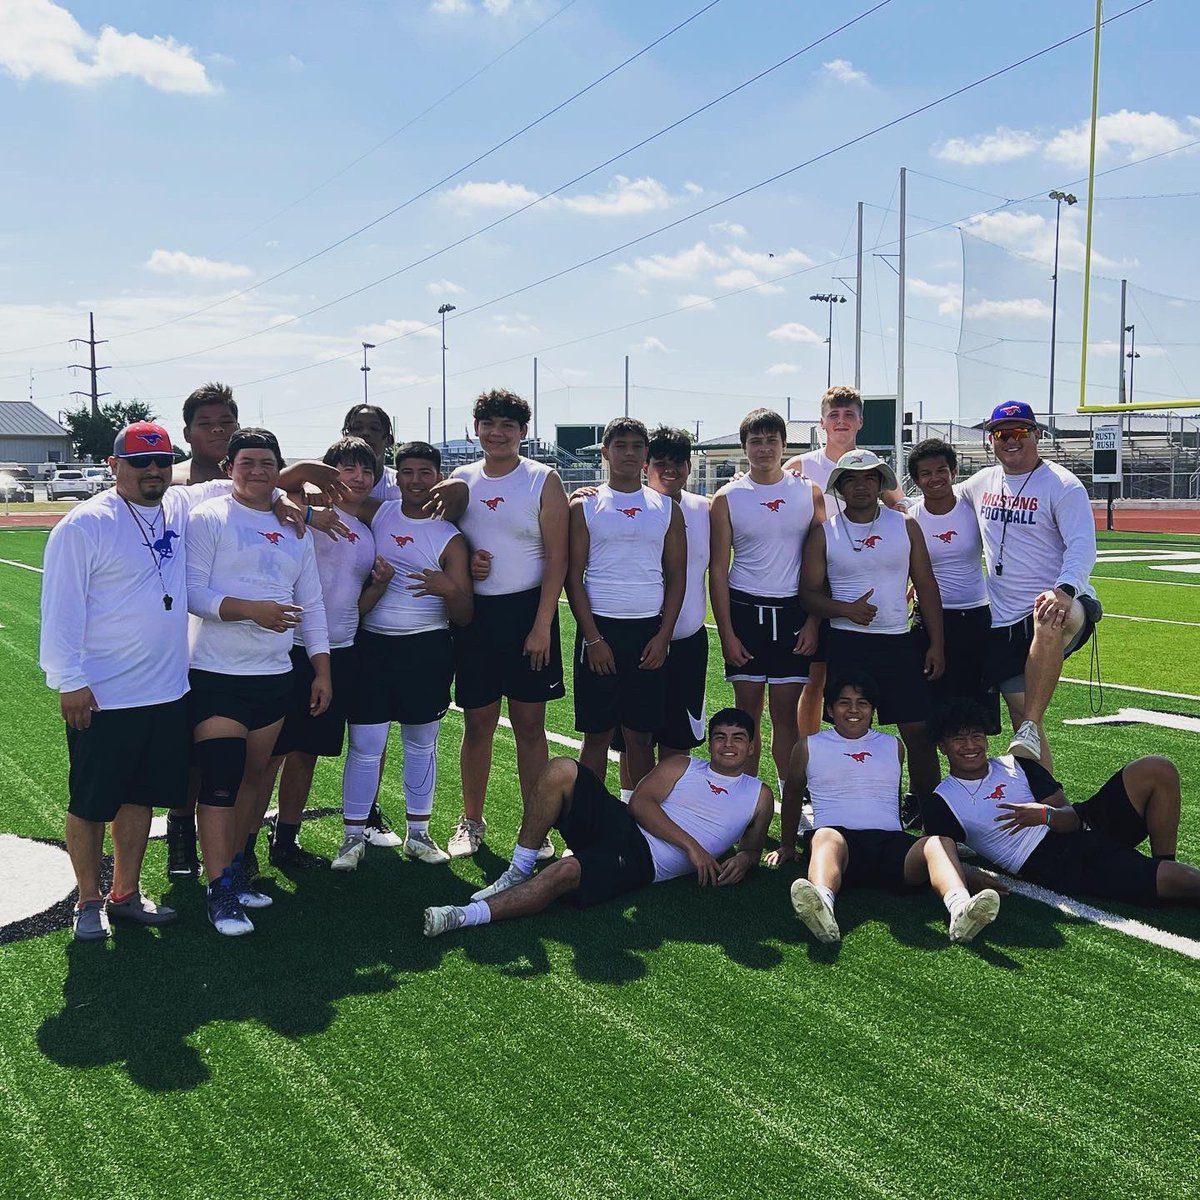 Mustangs showed up and did the work today at the Marion Lineman Challenge Great day to get better! @TroyMoses1 @KappakimMoses #showupdothework #MustangMindset